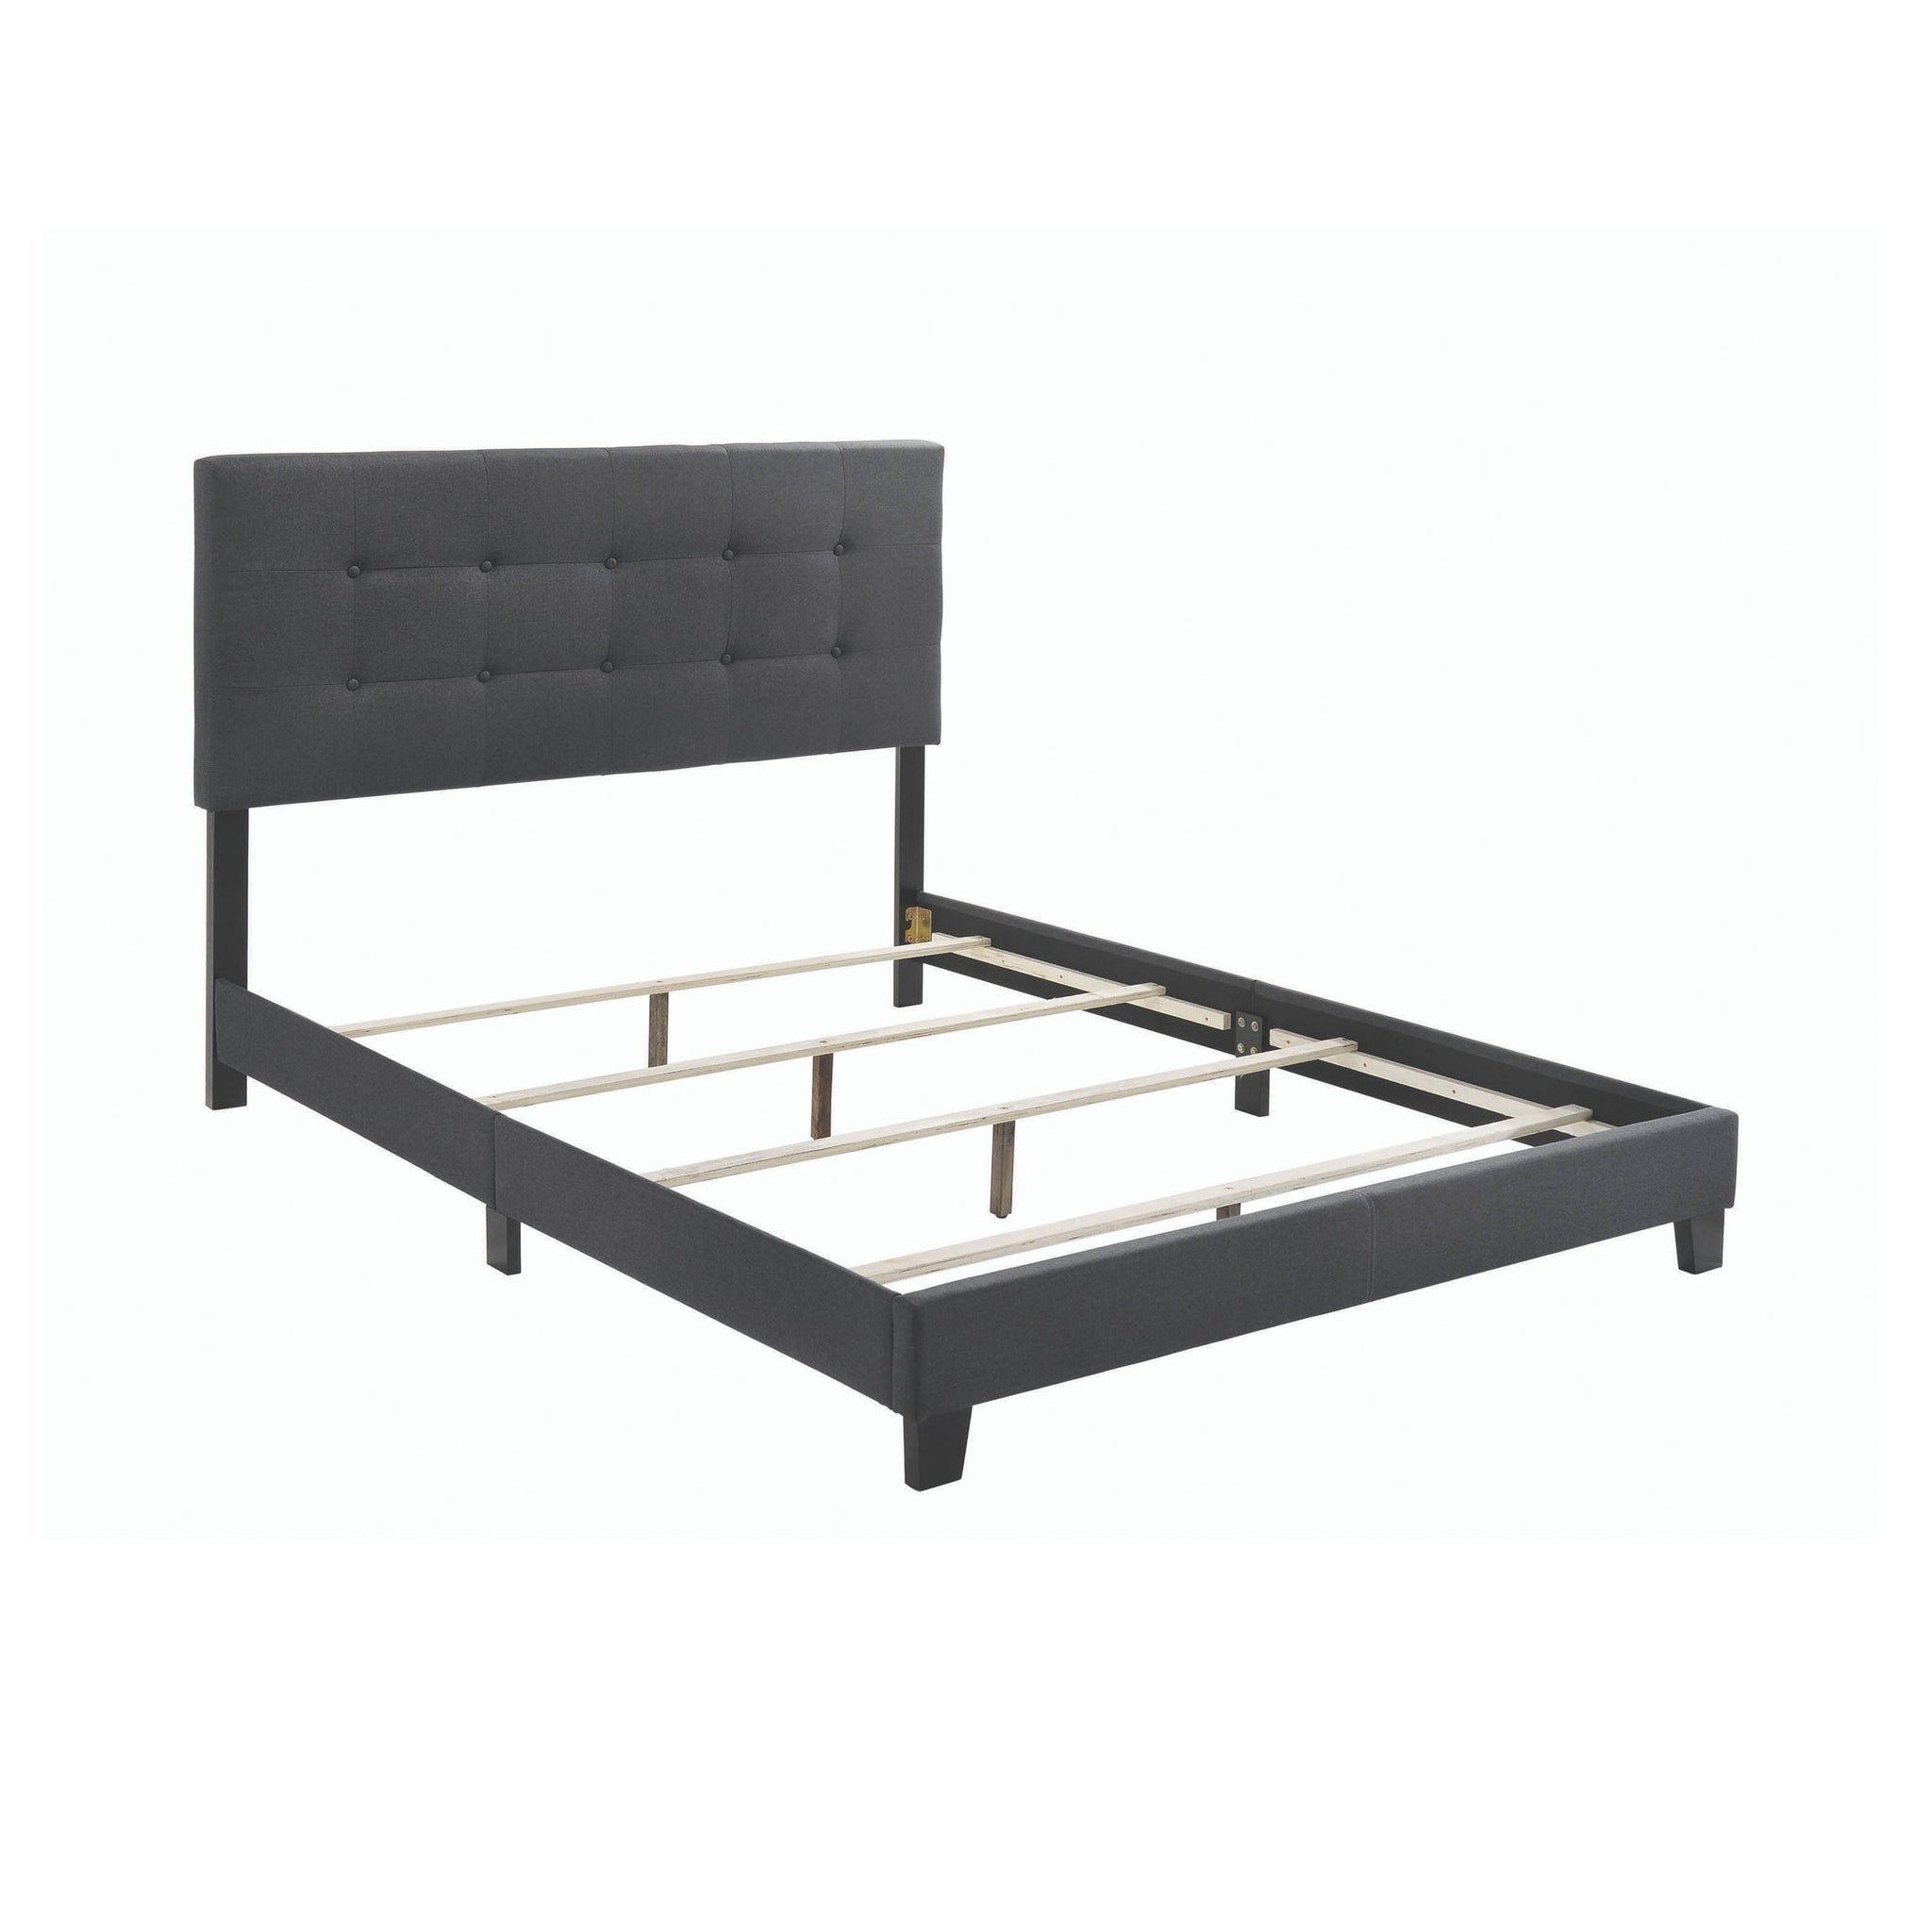 Mapes Tufted Upholstered Queen Bed Charcoal - 305746Q